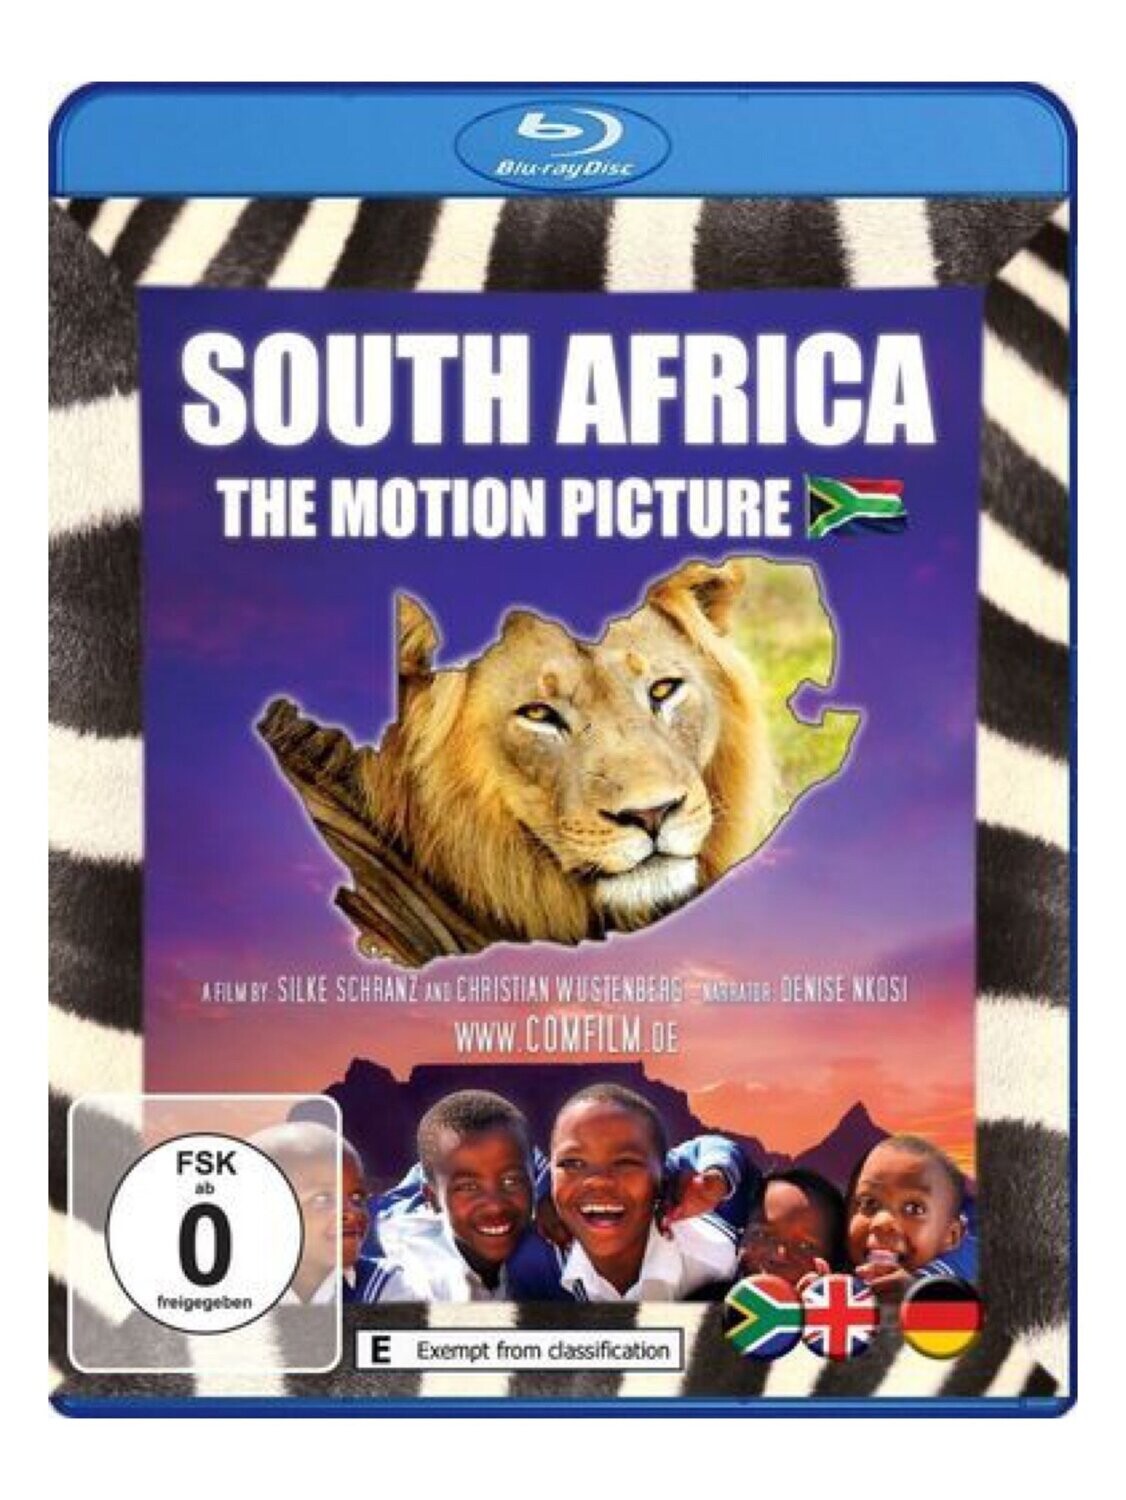 South Africa - The Motion Picture: Blu-ray